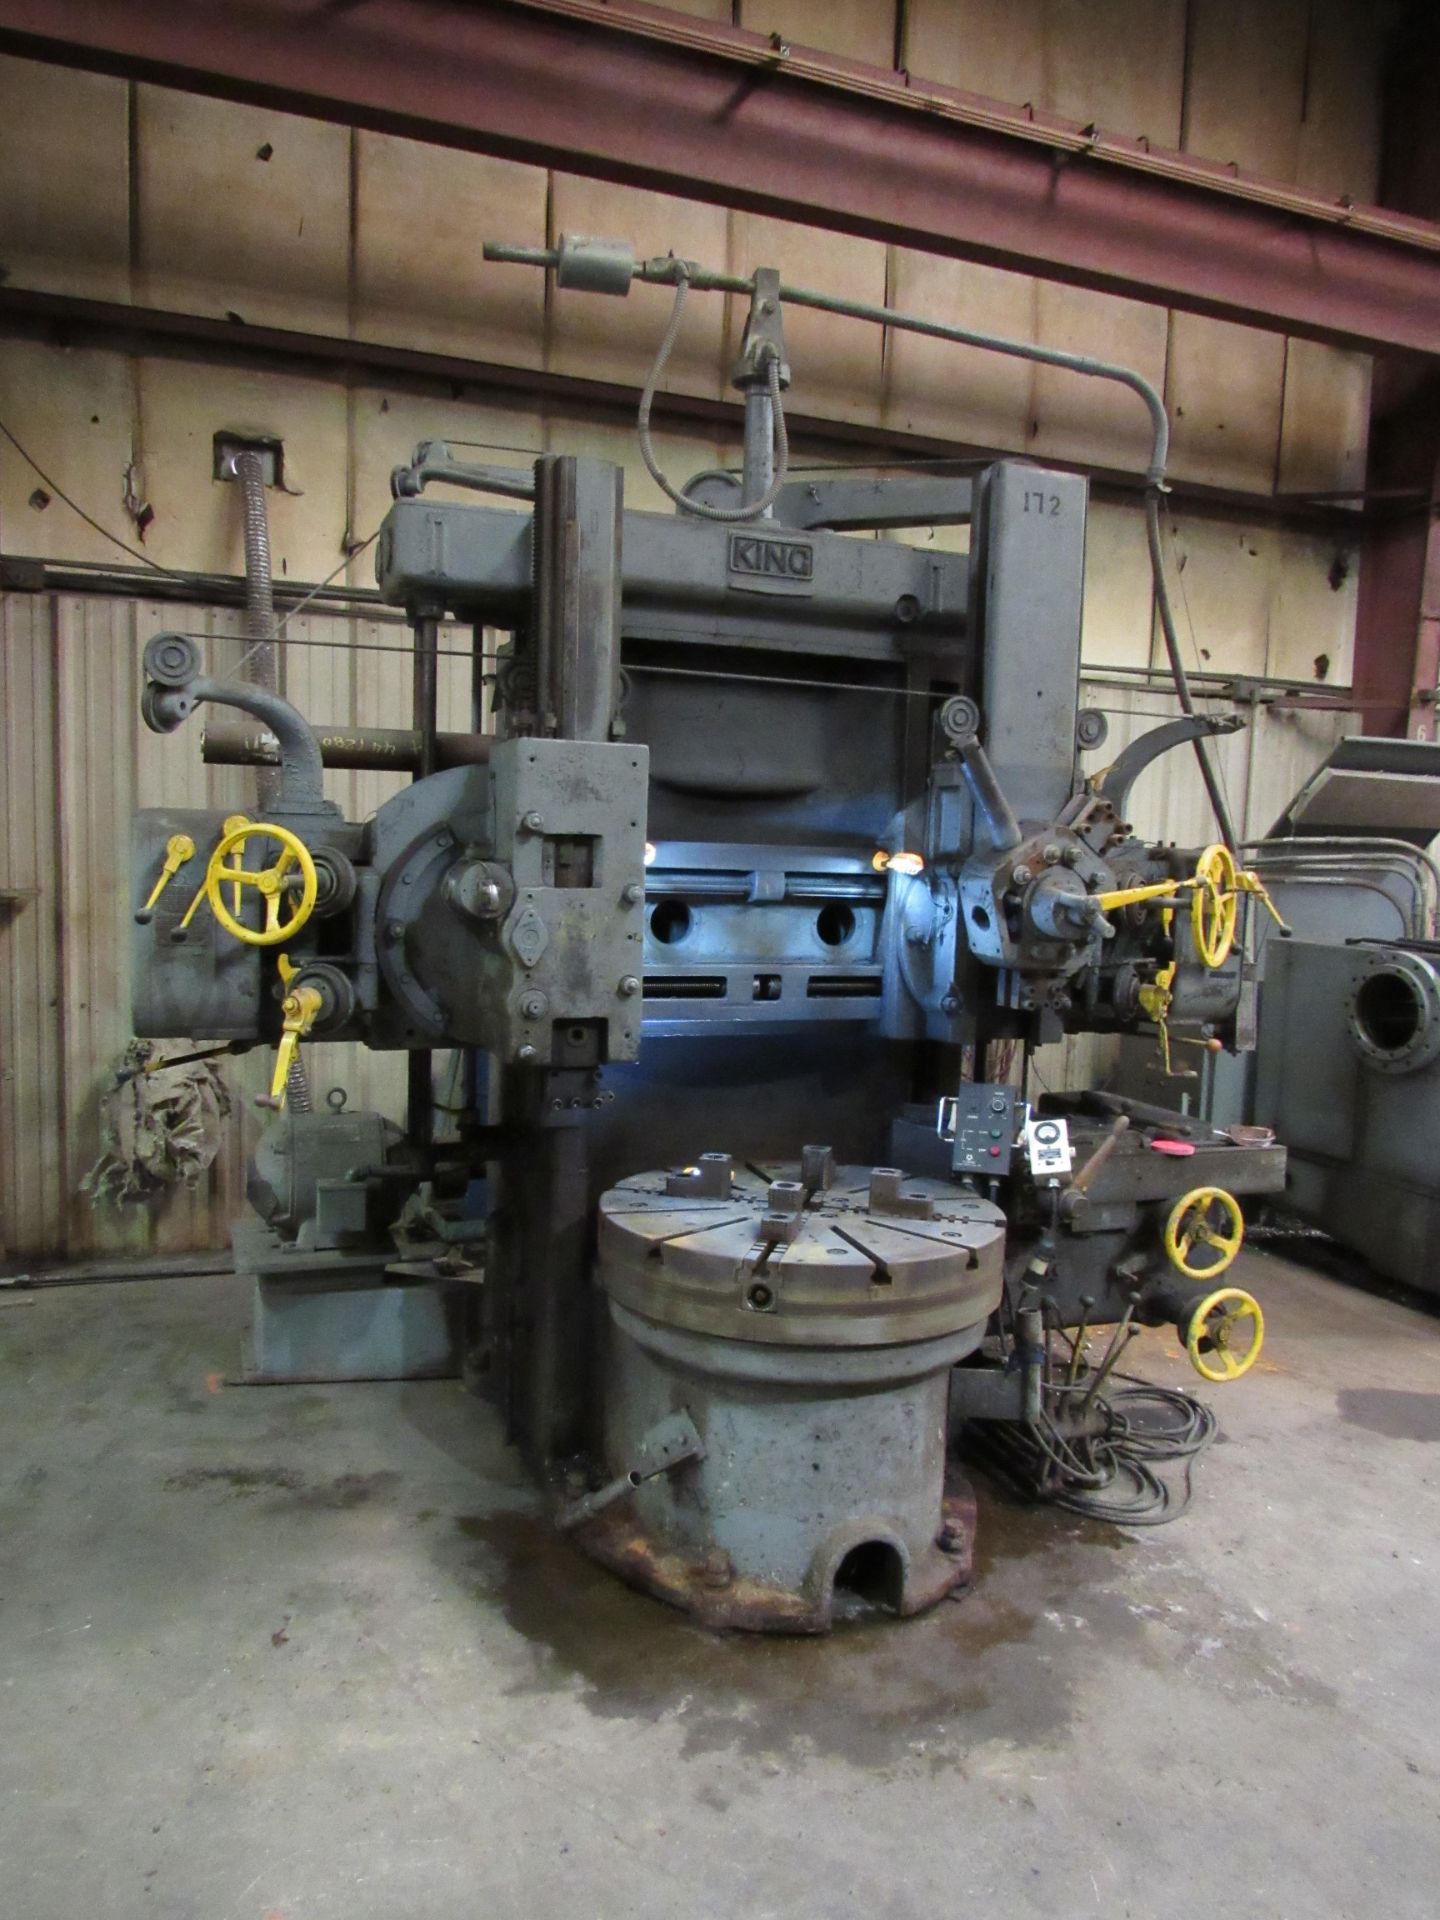 King 42'' Vertical Boring Mill - Image 4 of 6